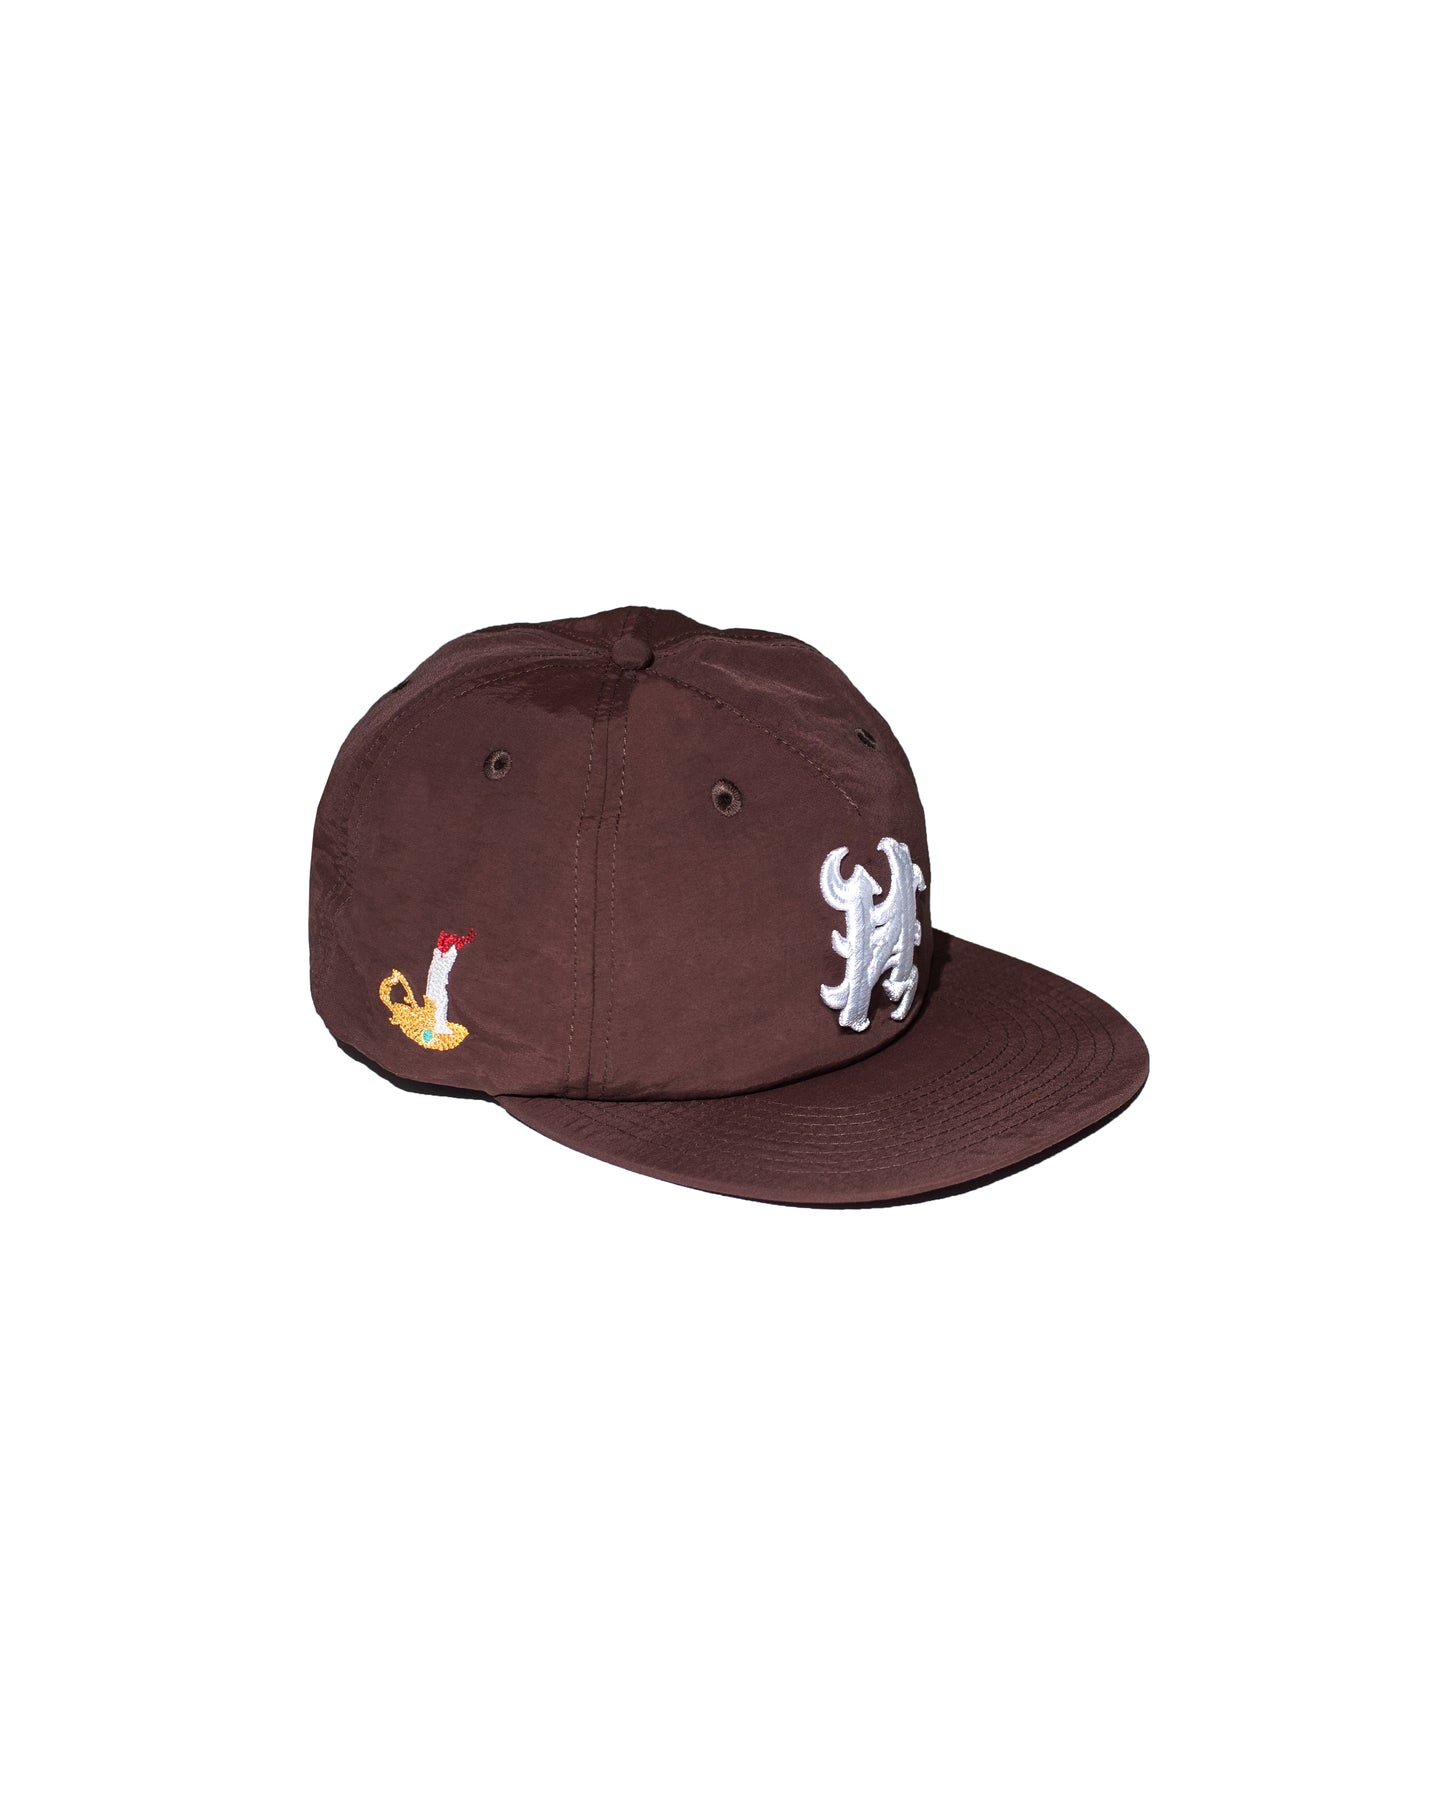 CANDLE HAT [BROWN]